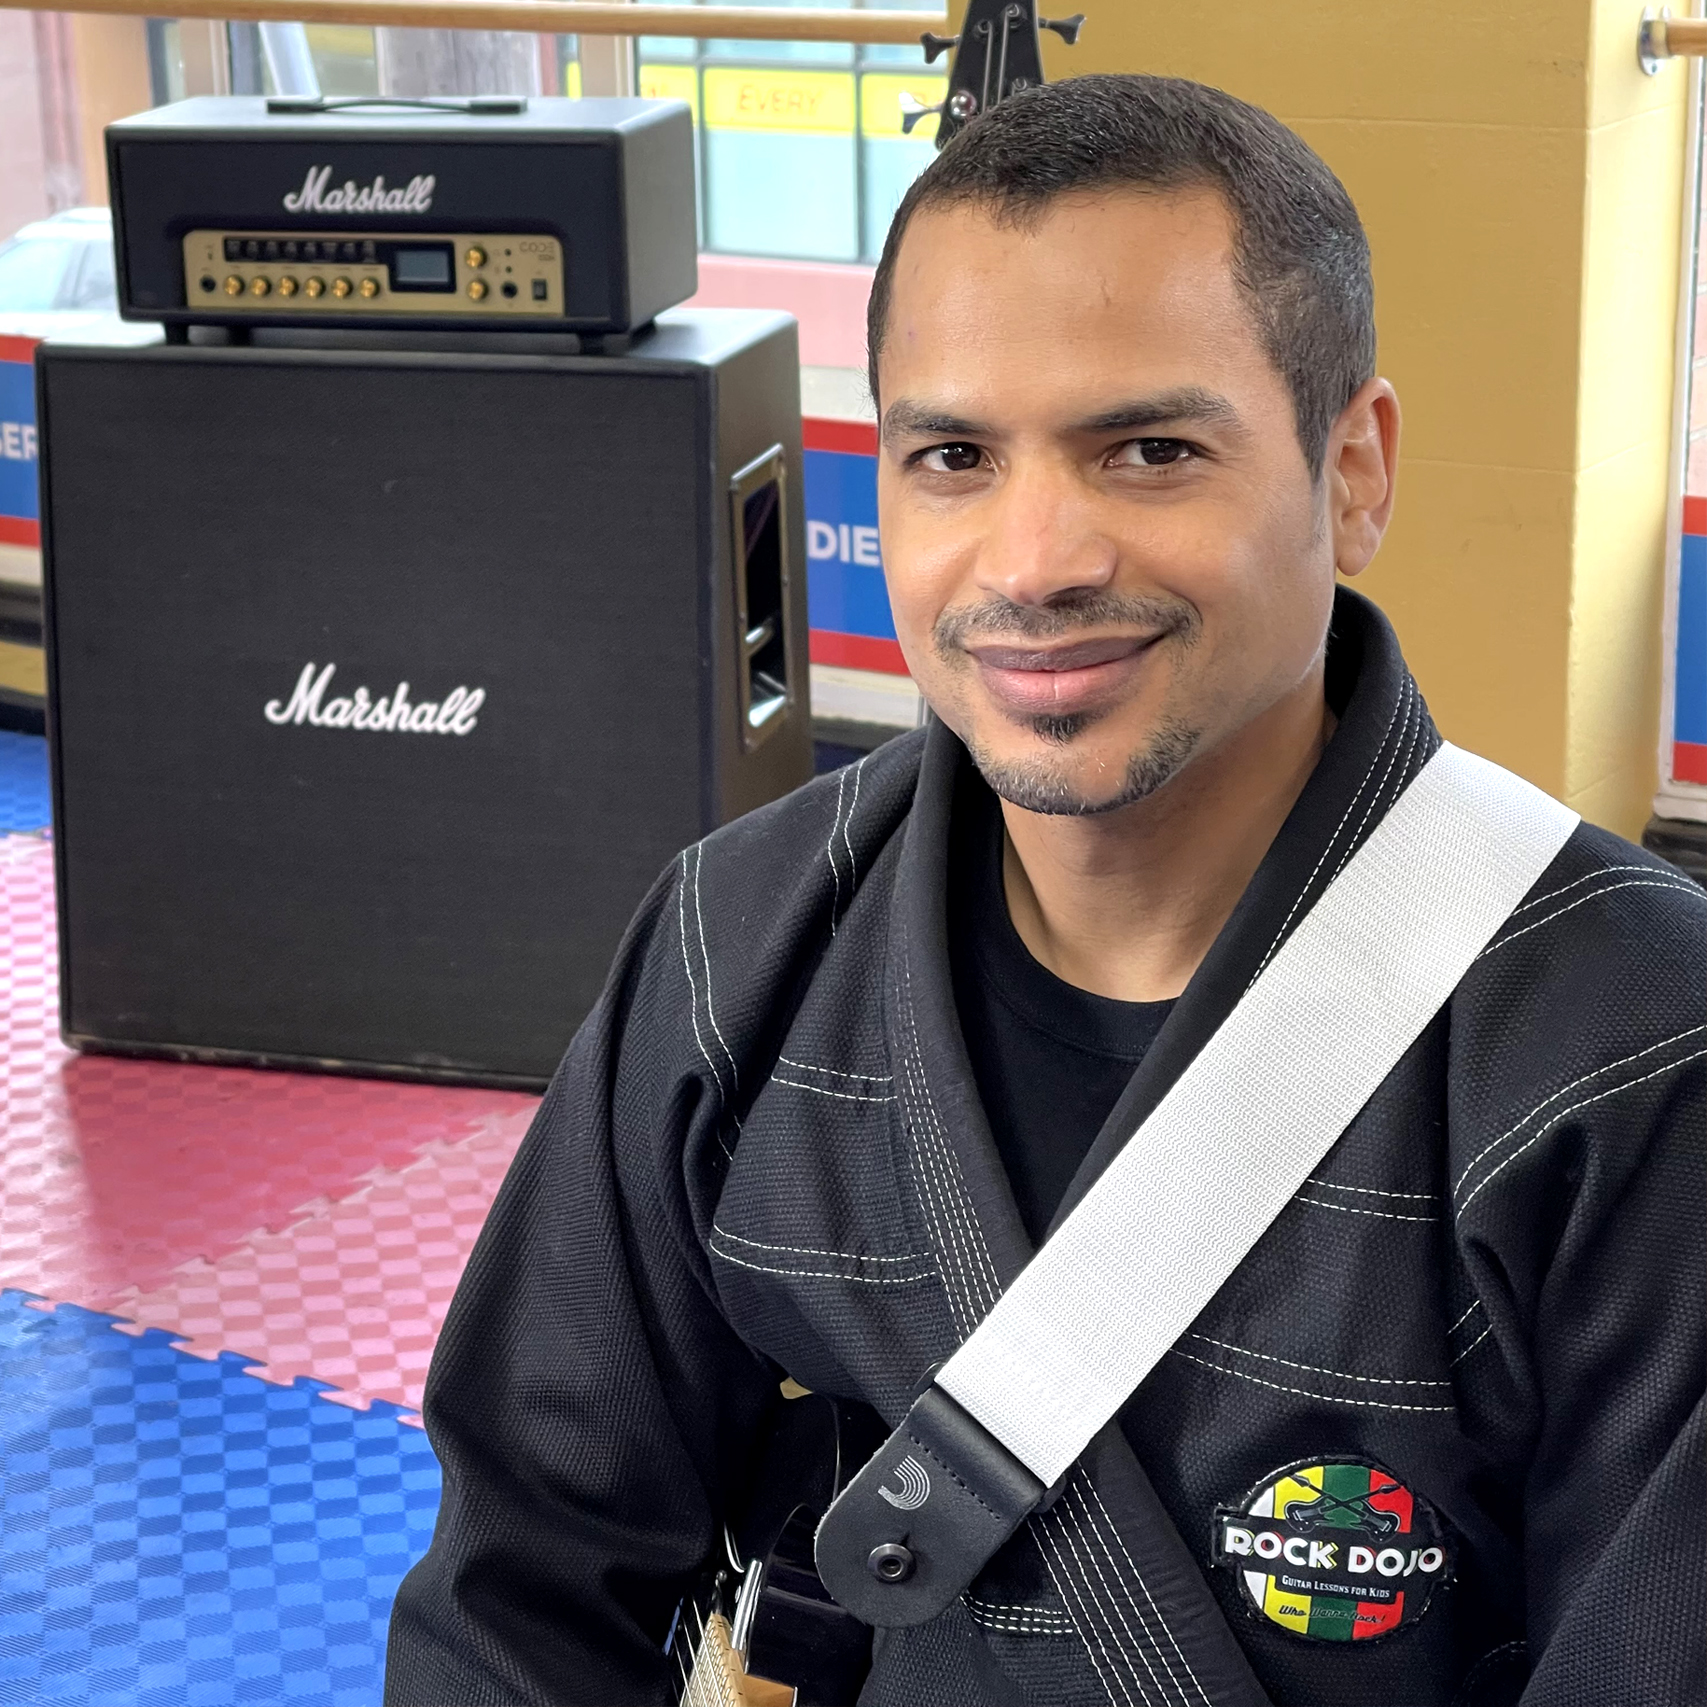 Brian Parham, founder and lead instructor of Rock Dojo, teaching online guitar lessons for kids